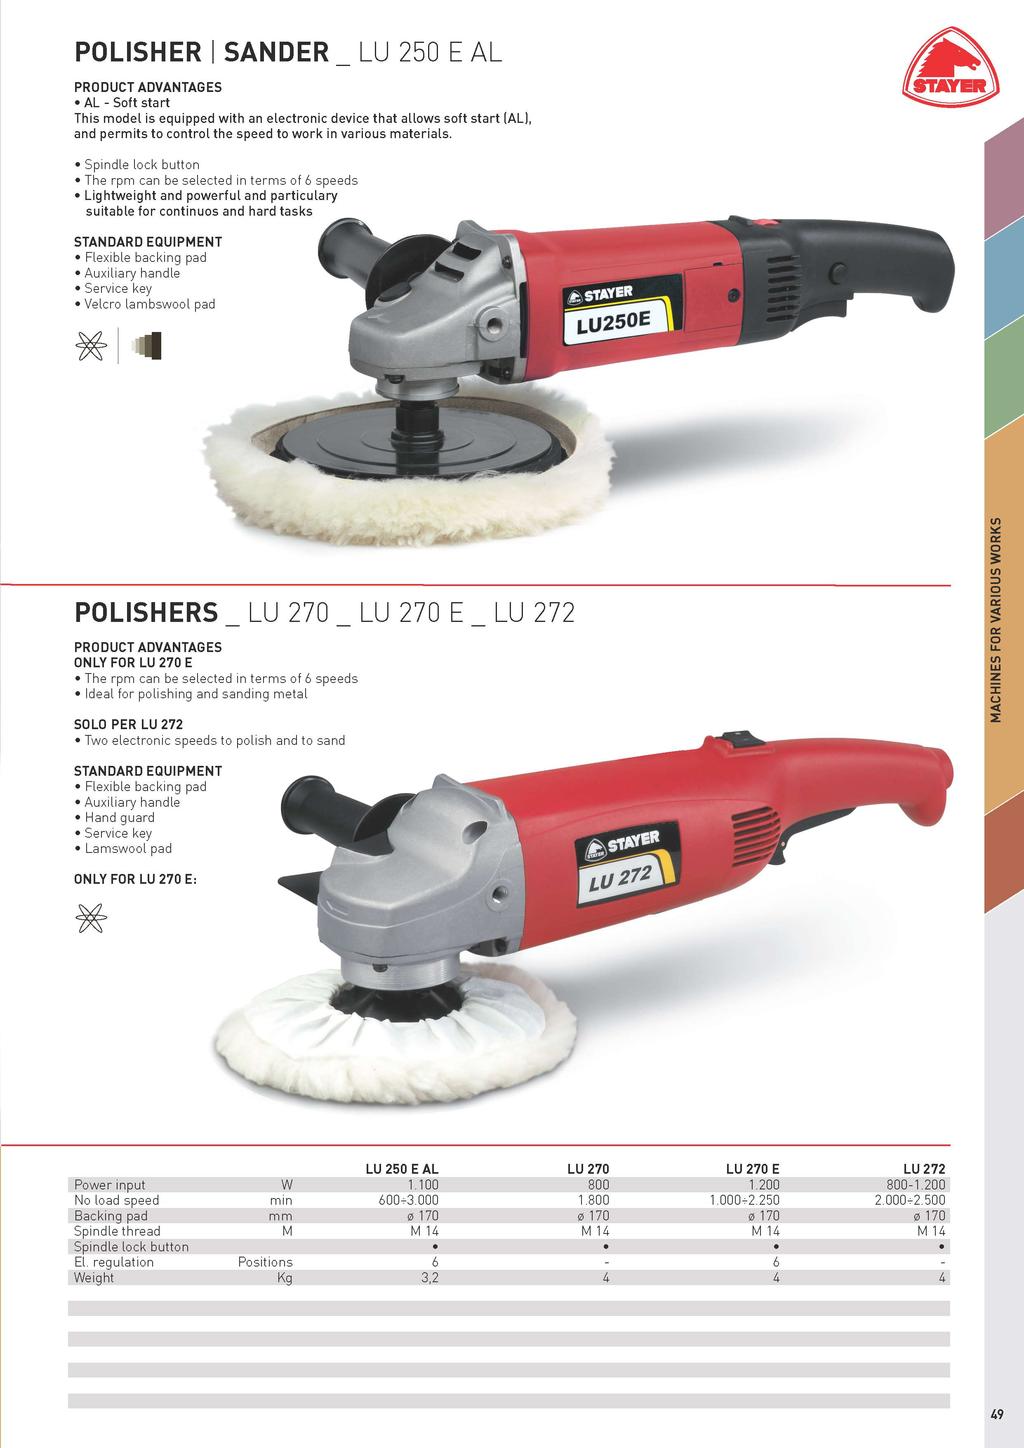 POLISHER SANDER _ LU 250 E AL AL - Soft start This model is equipped with an electronic device that allows soft start (AL), and permits to control the speed to work in various materials.